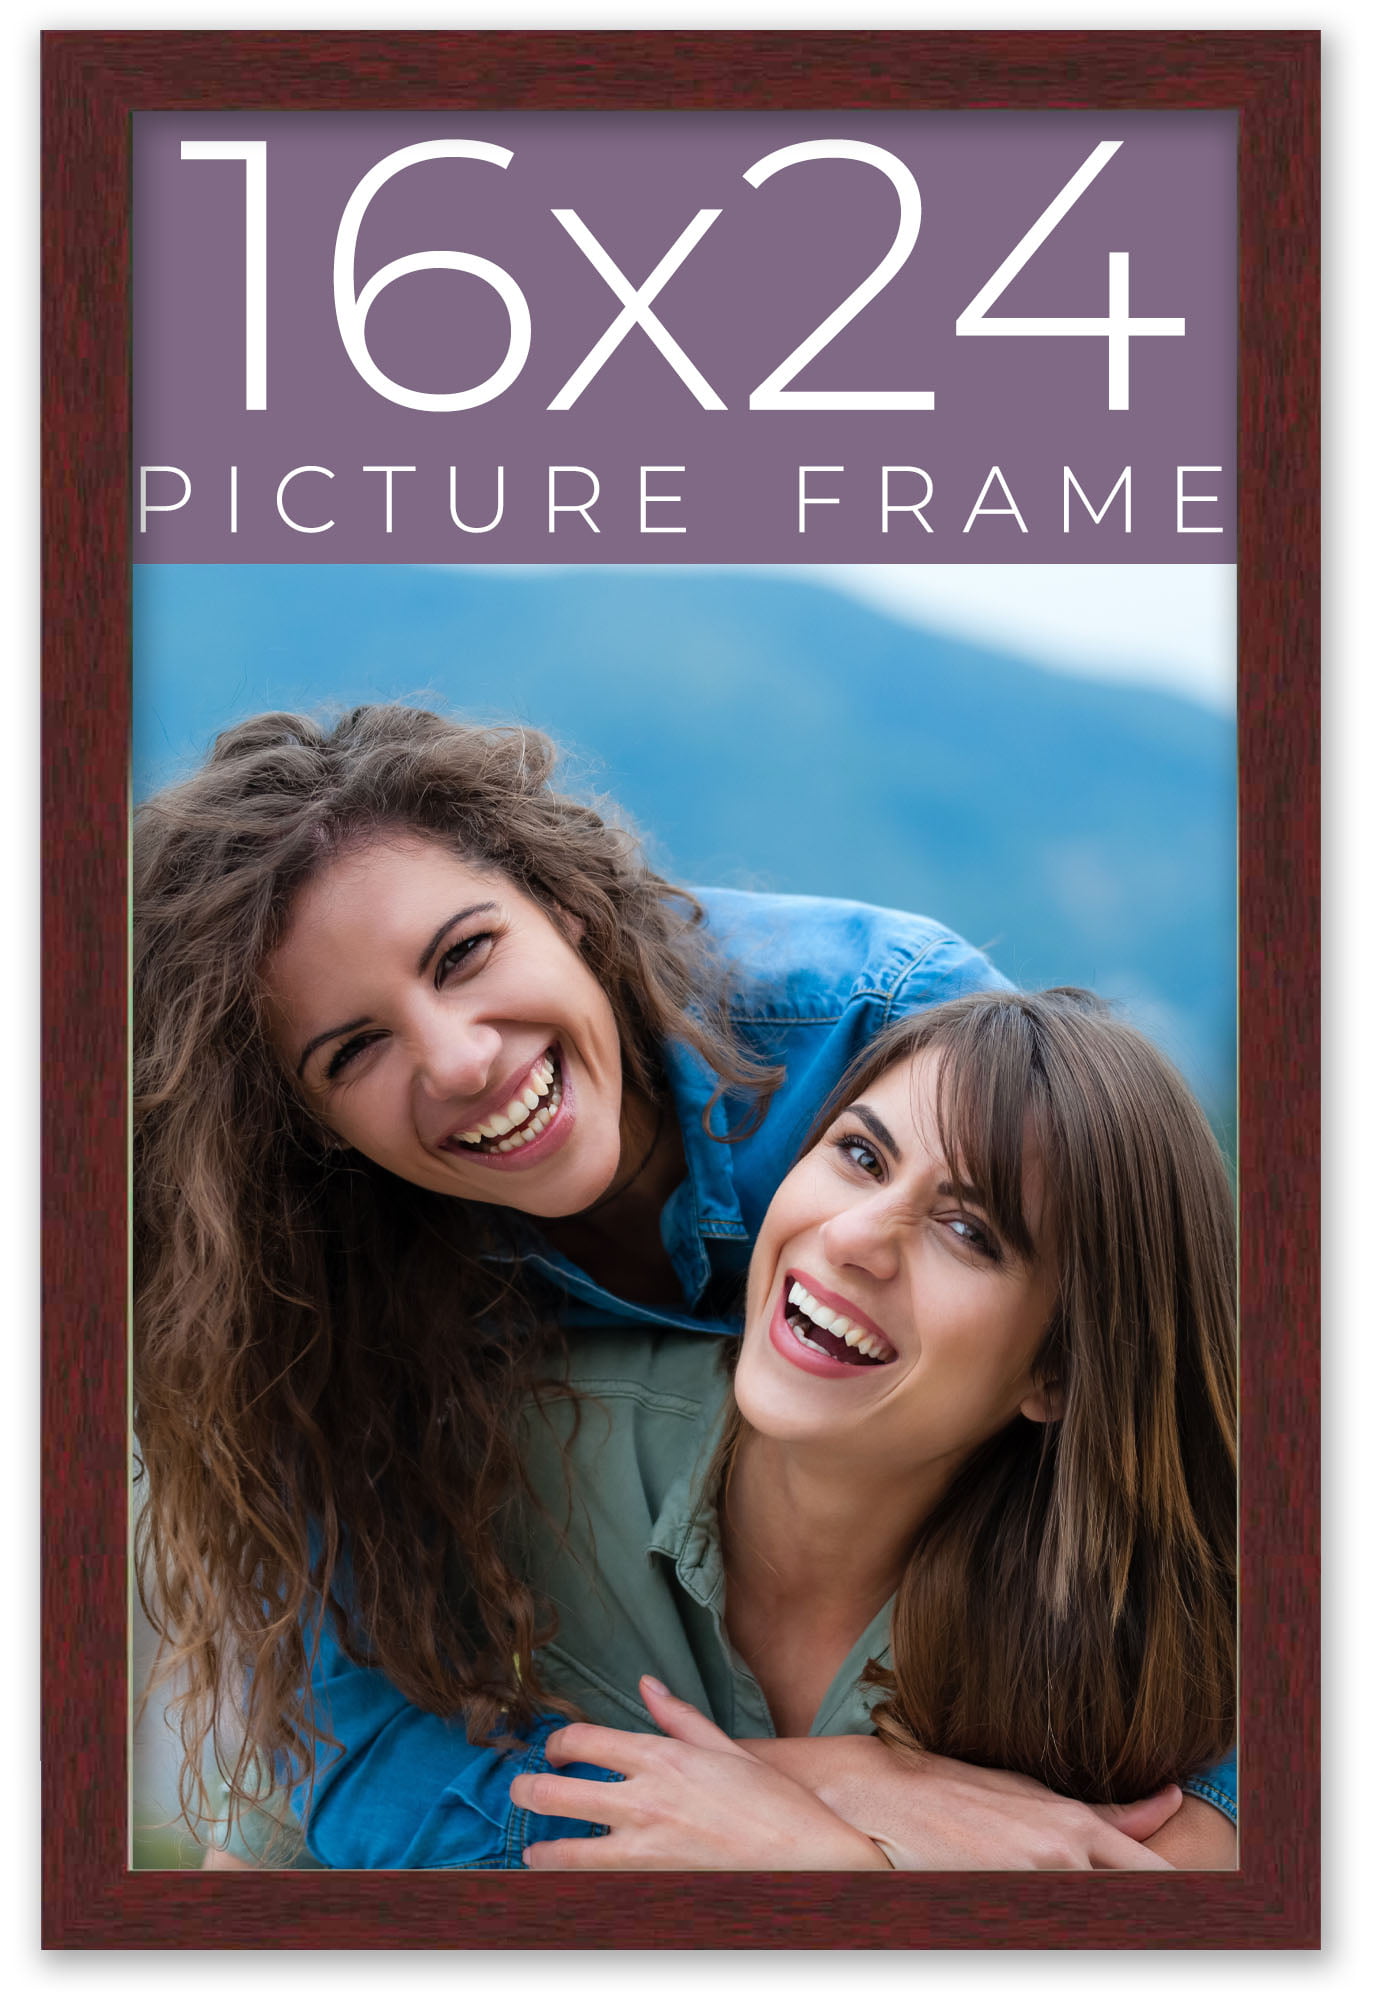 16x24 Dark Brown Real Wood Picture Frame Width 0.75 inches | Interior Frame  Depth 0.5 inches | Dark